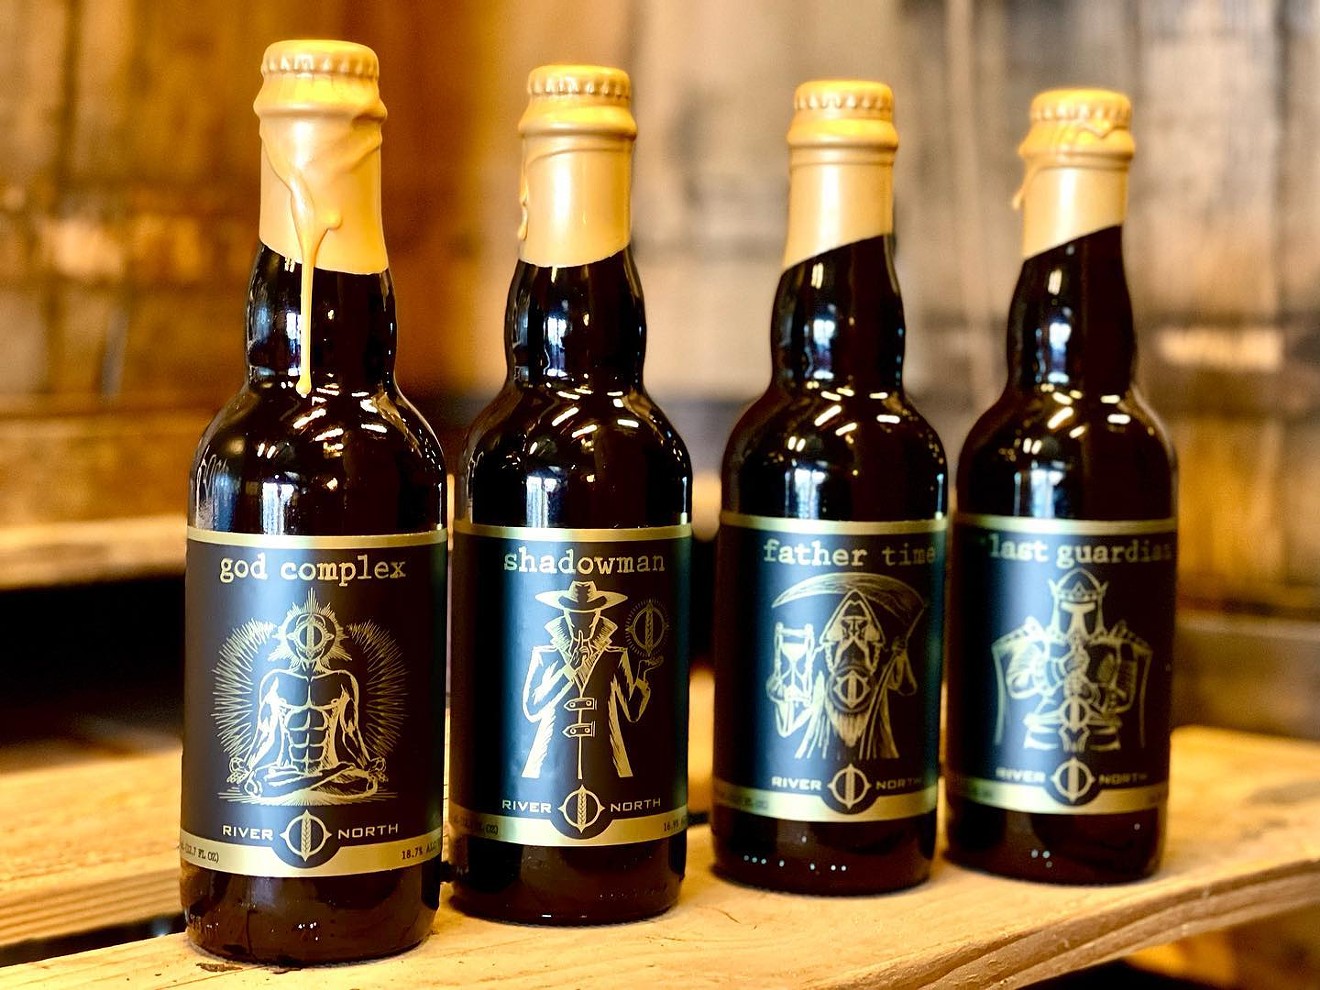 The Vicennial series includes beers that are all above 15 percent ABV.